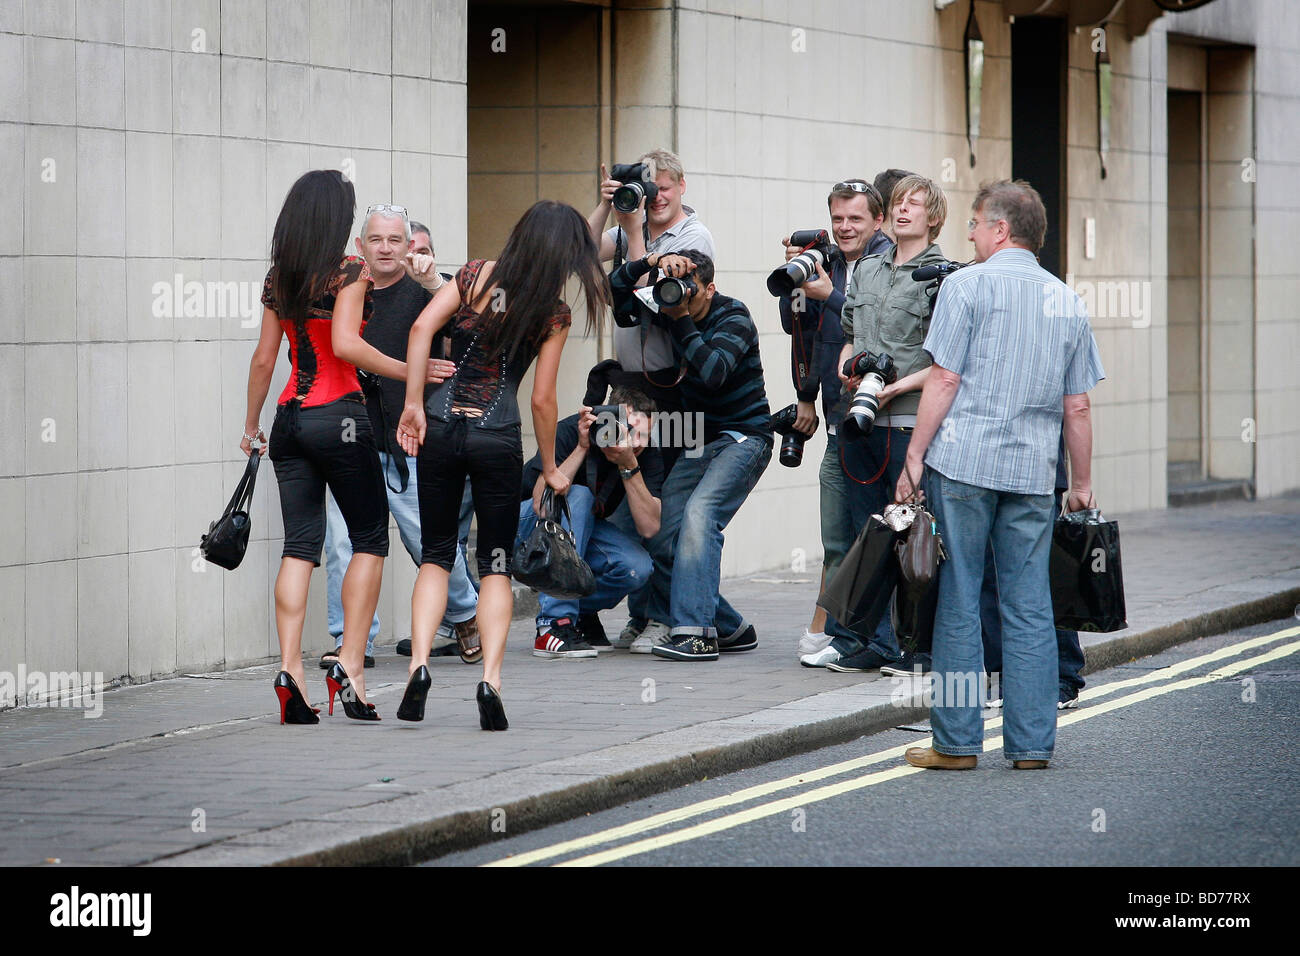 Pop Stars the Cheeky Girls are ambushed by members of London's Paparazzi outside the Dorchester hotel. Stock Photo